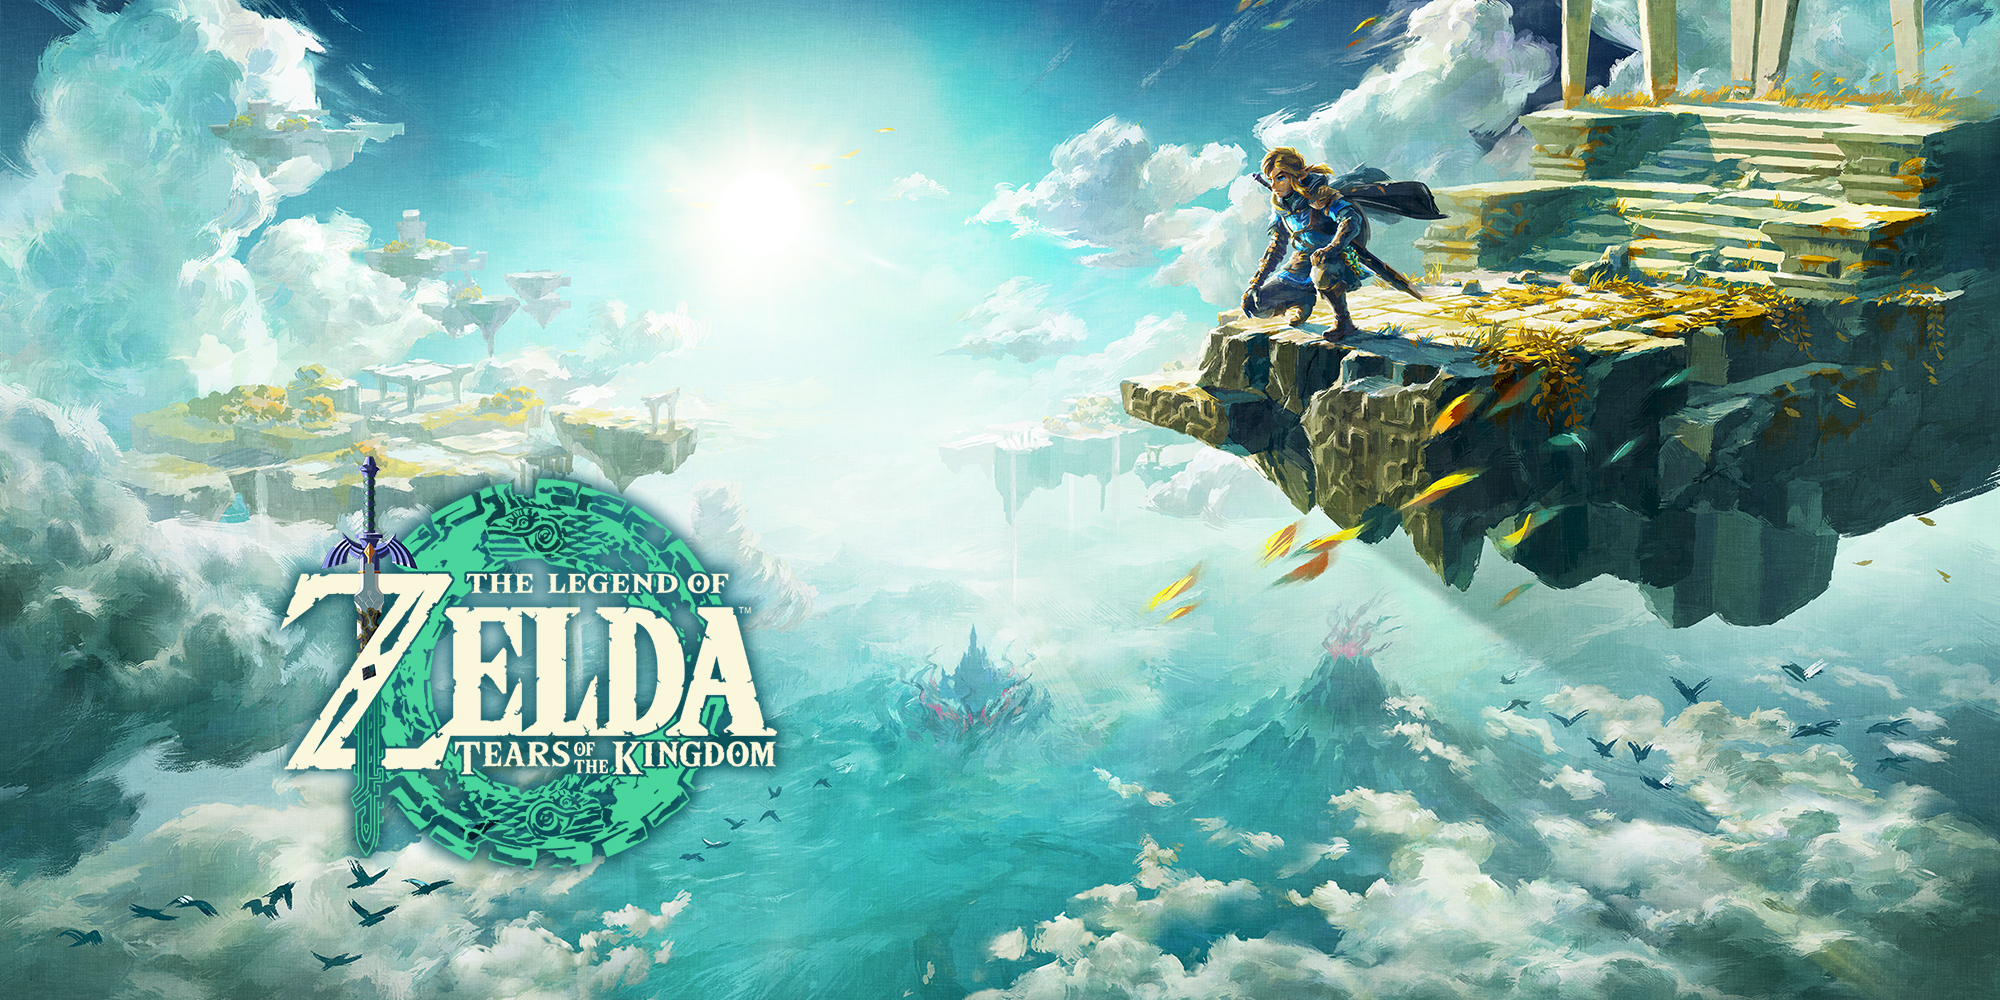 The Legend of Zelda: Tears of the Kingdom poster with Link crouching on the edge of a sky island piece